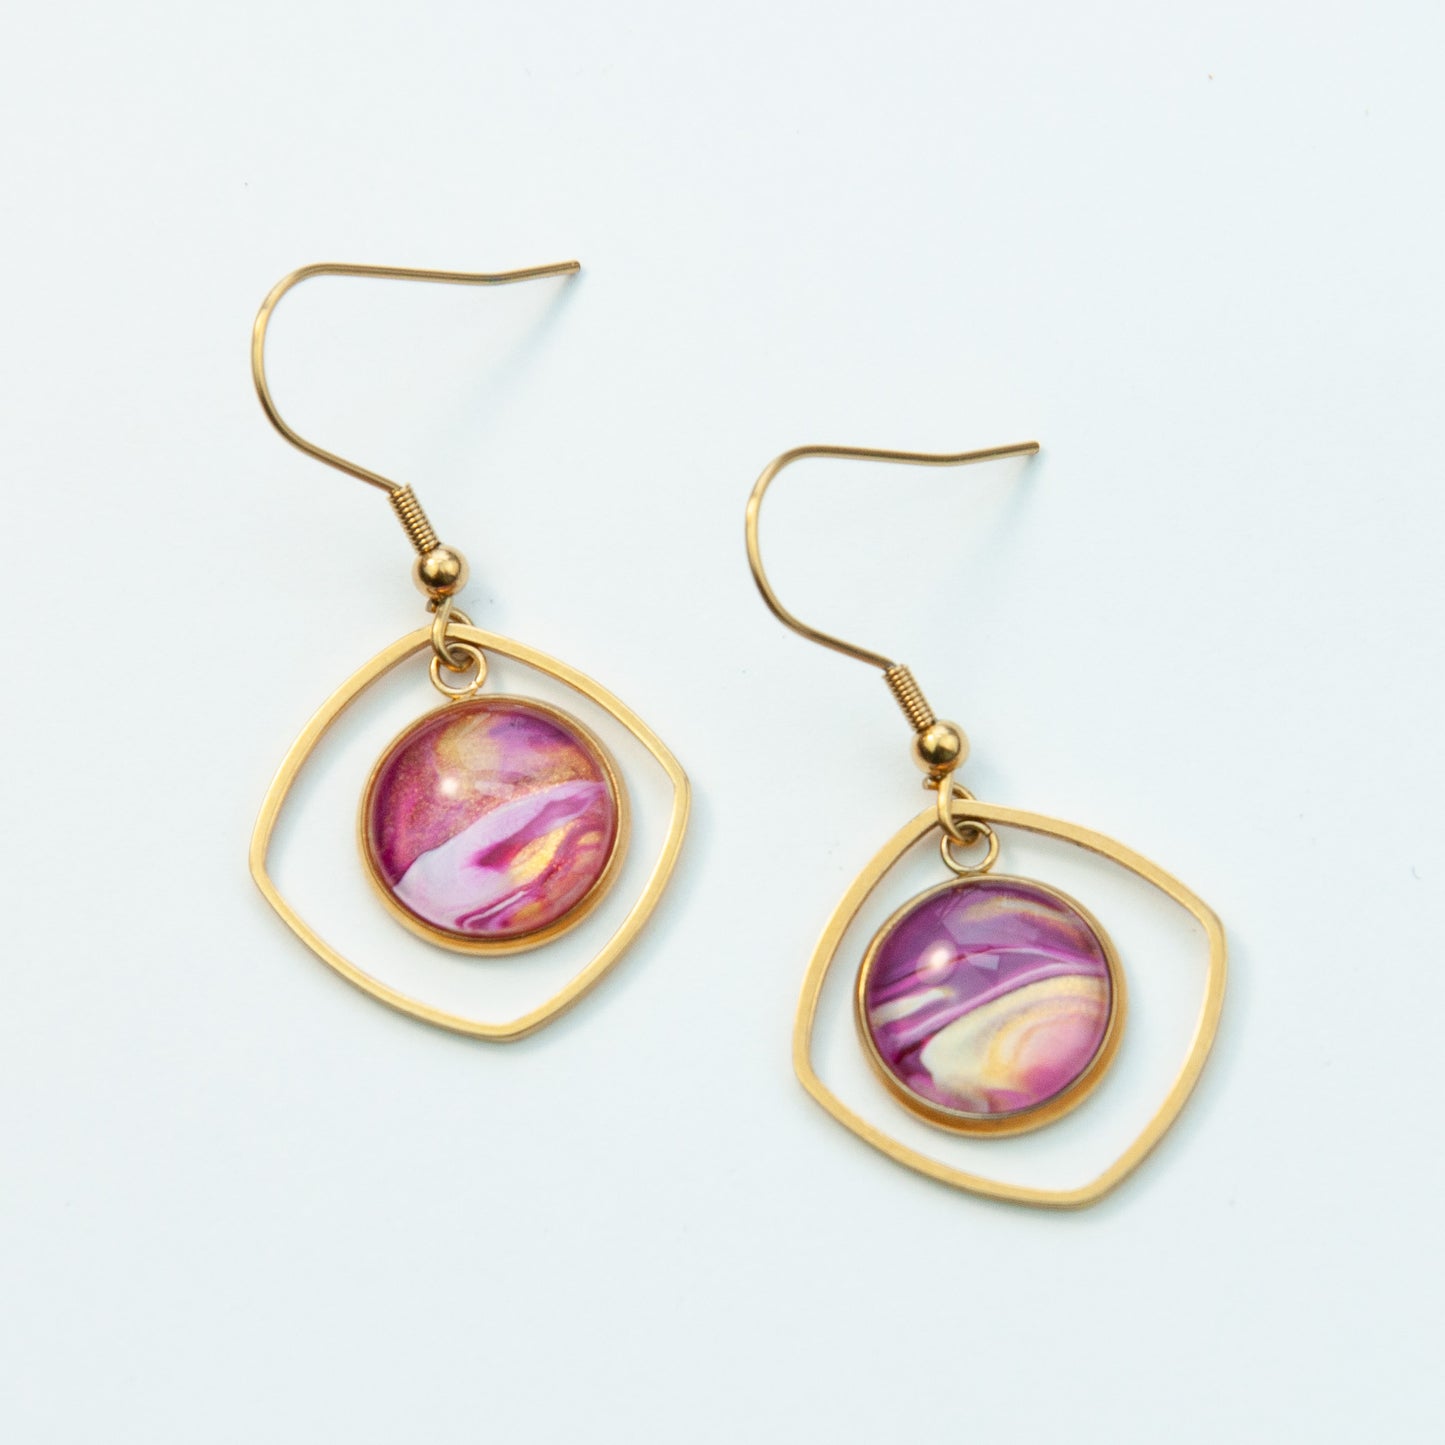 Pink and Gold Rounded Square Pennant Earrings (110-G)